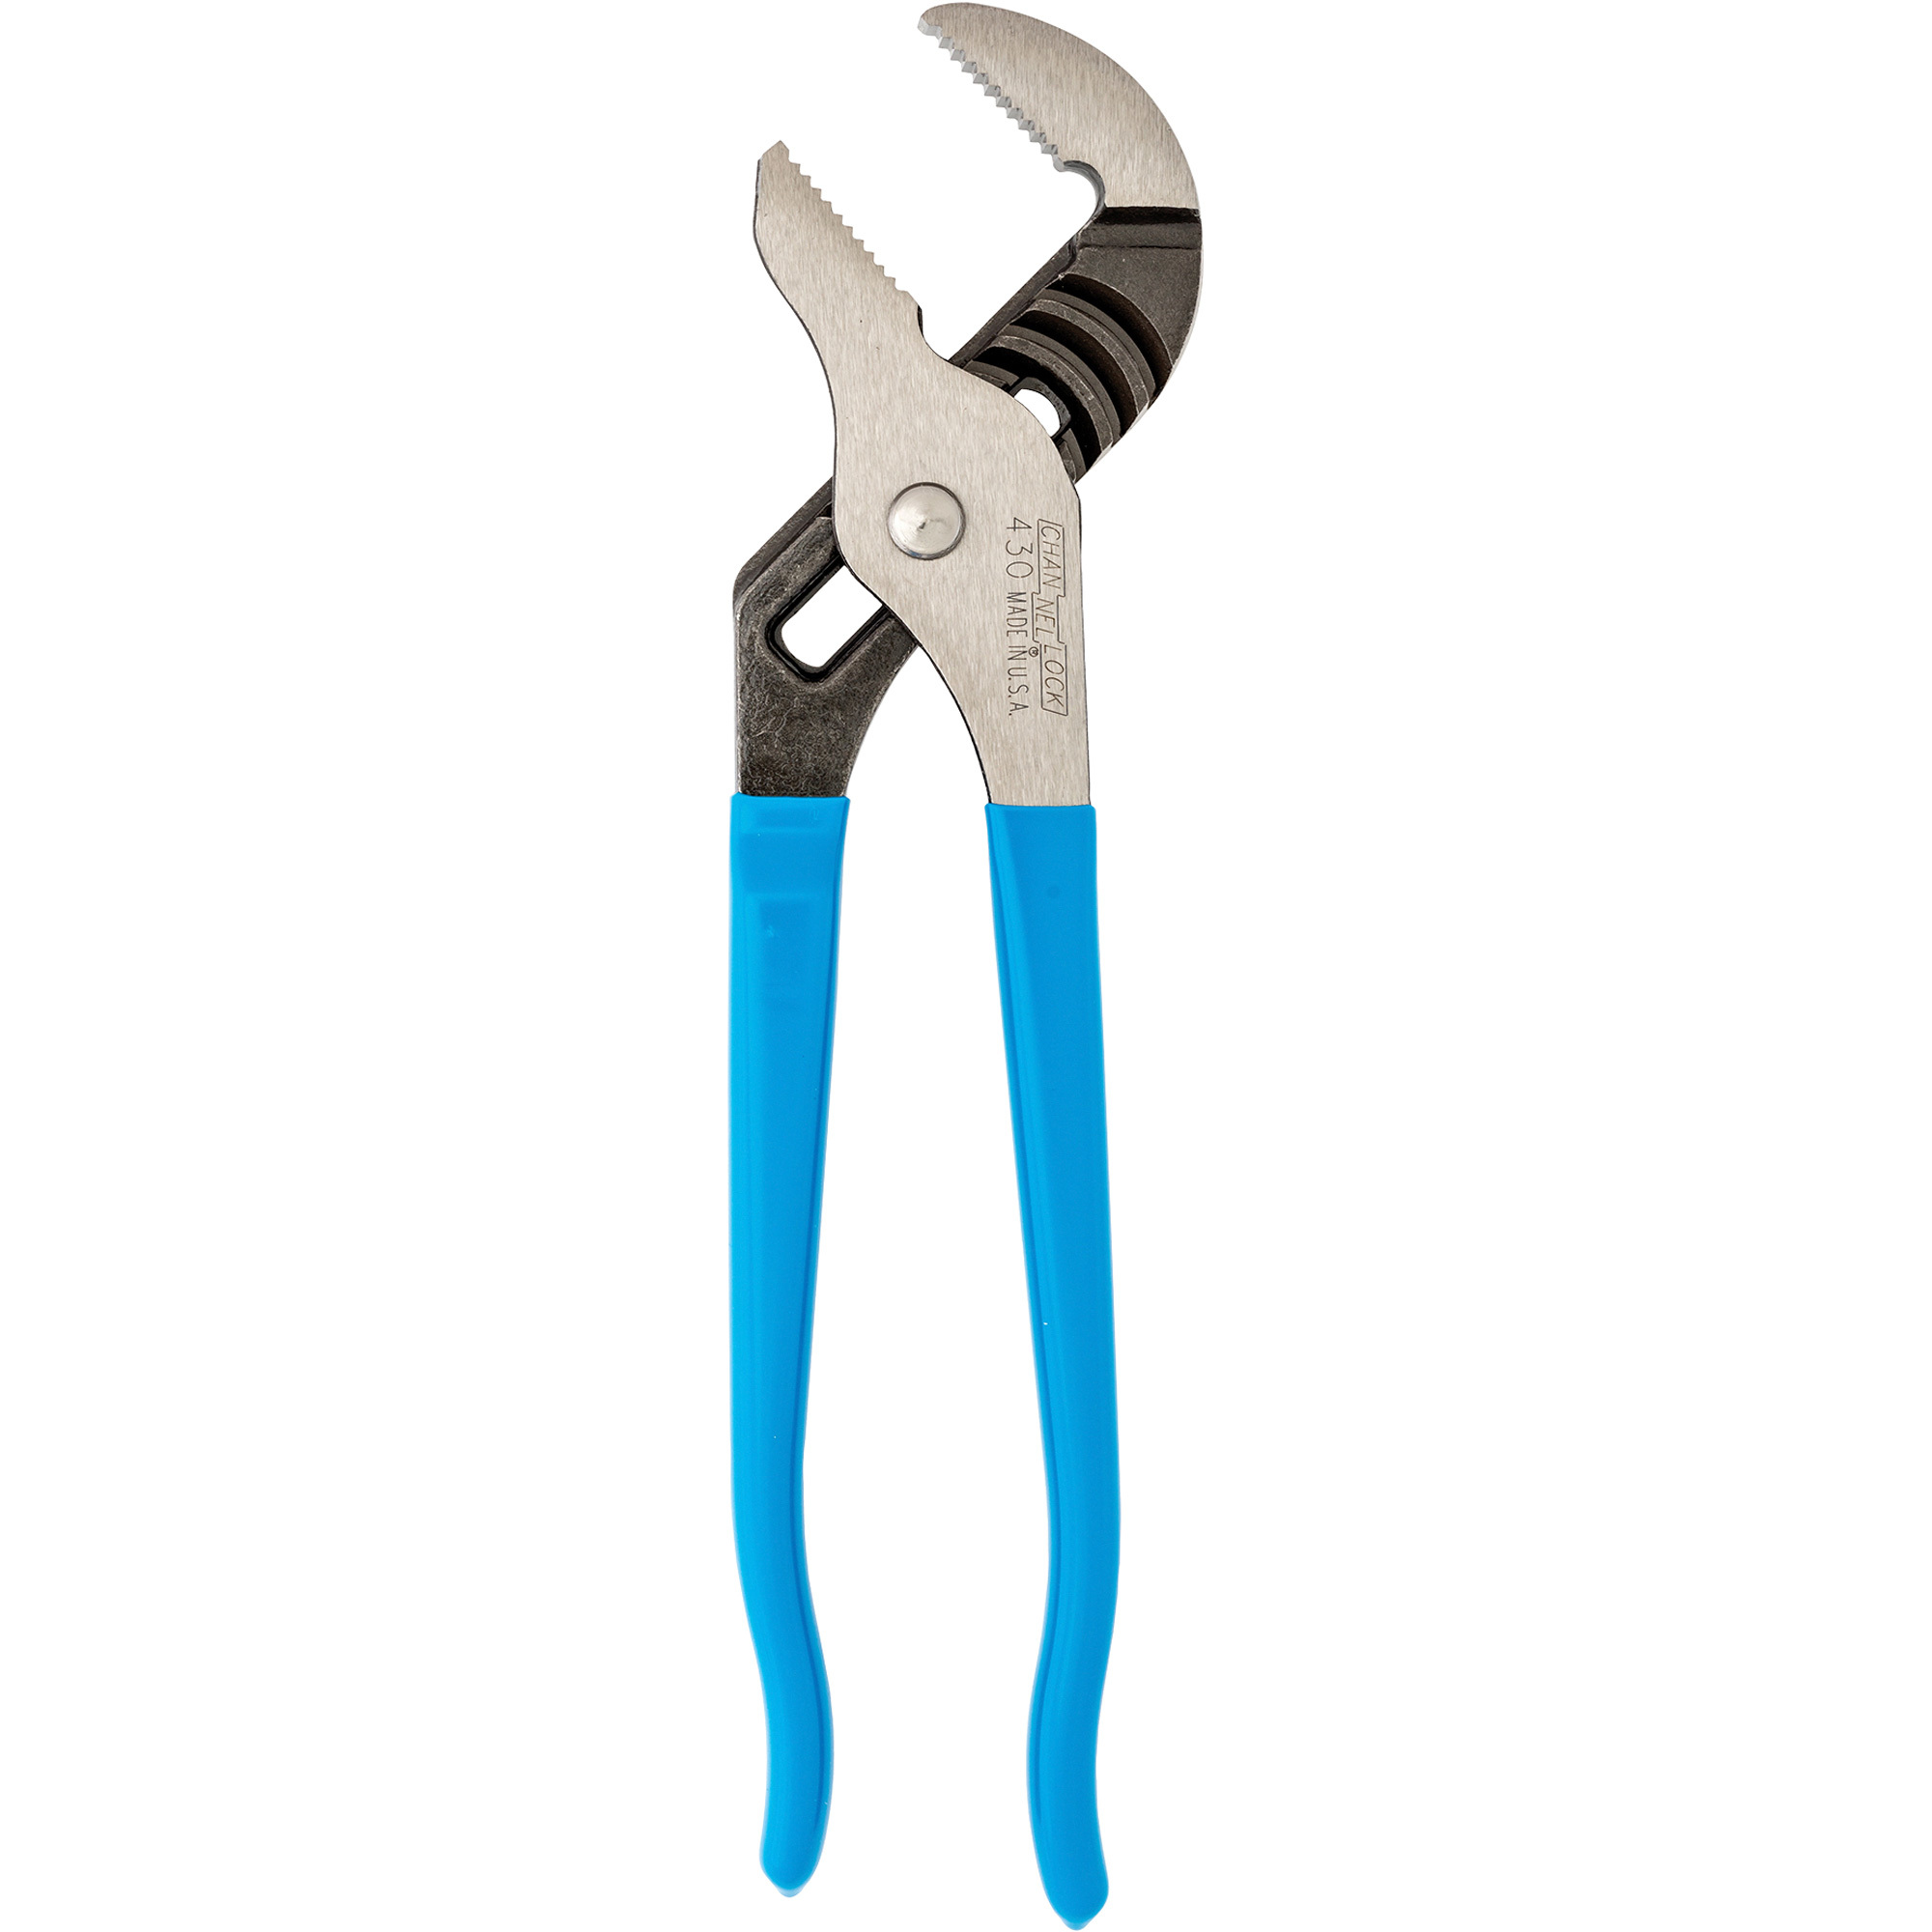 Channellock Tongue & Groove Pliers â 10Inch, Model 430